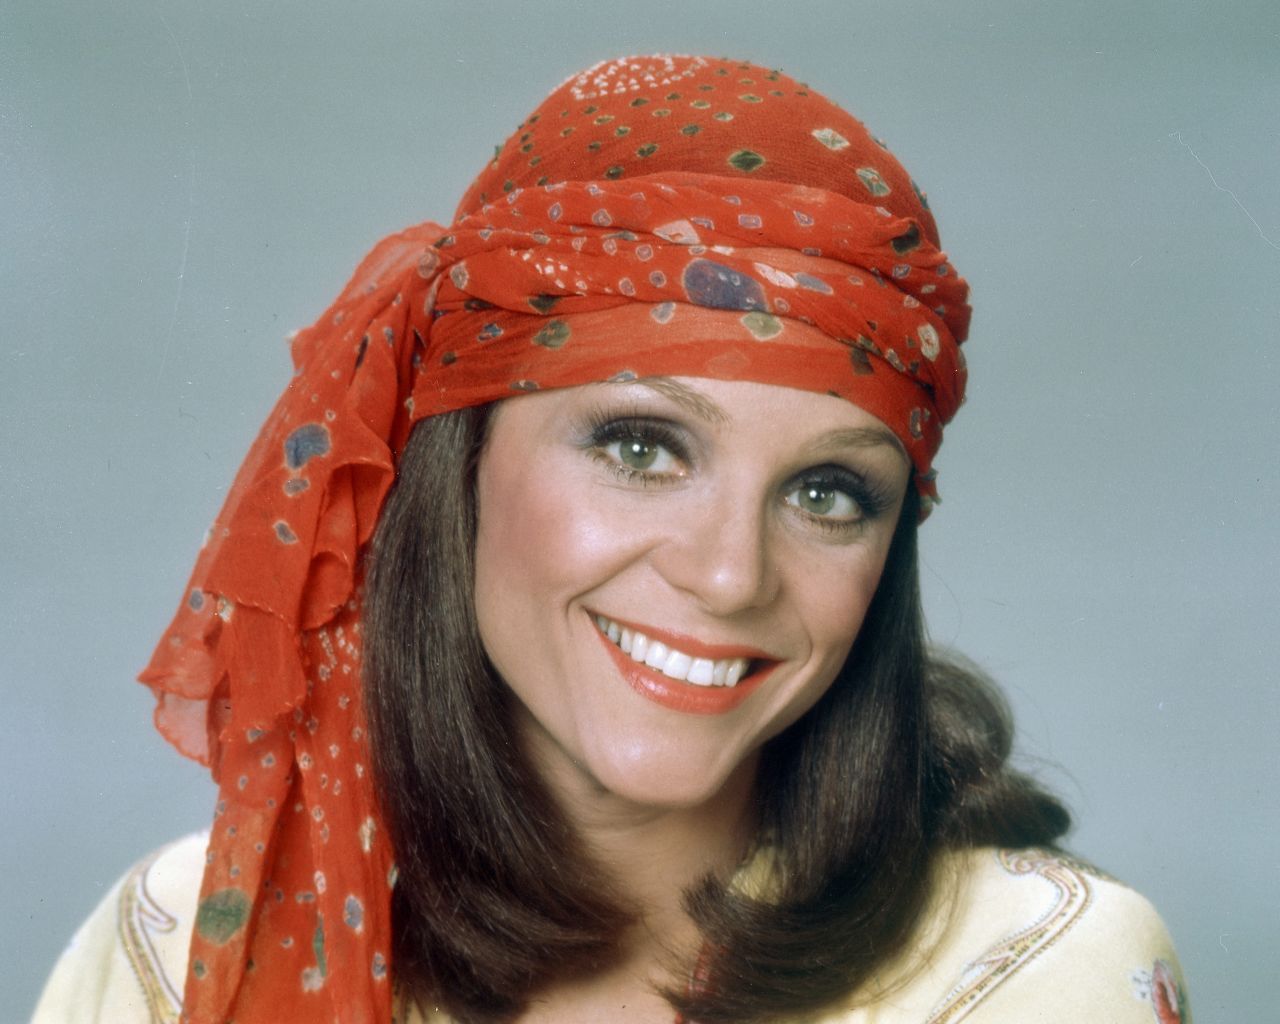 Emmy-winning actress <a href="https://www.cnn.com/2019/08/30/entertainment/valerie-harper-obituary/index.html" target="_blank">Valerie Harper</a>, who starred as Rhoda in the hit sitcoms "The Mary Tyler Moore Show" and "Rhoda," died August 30 after a long battle with cancer. She was 80.